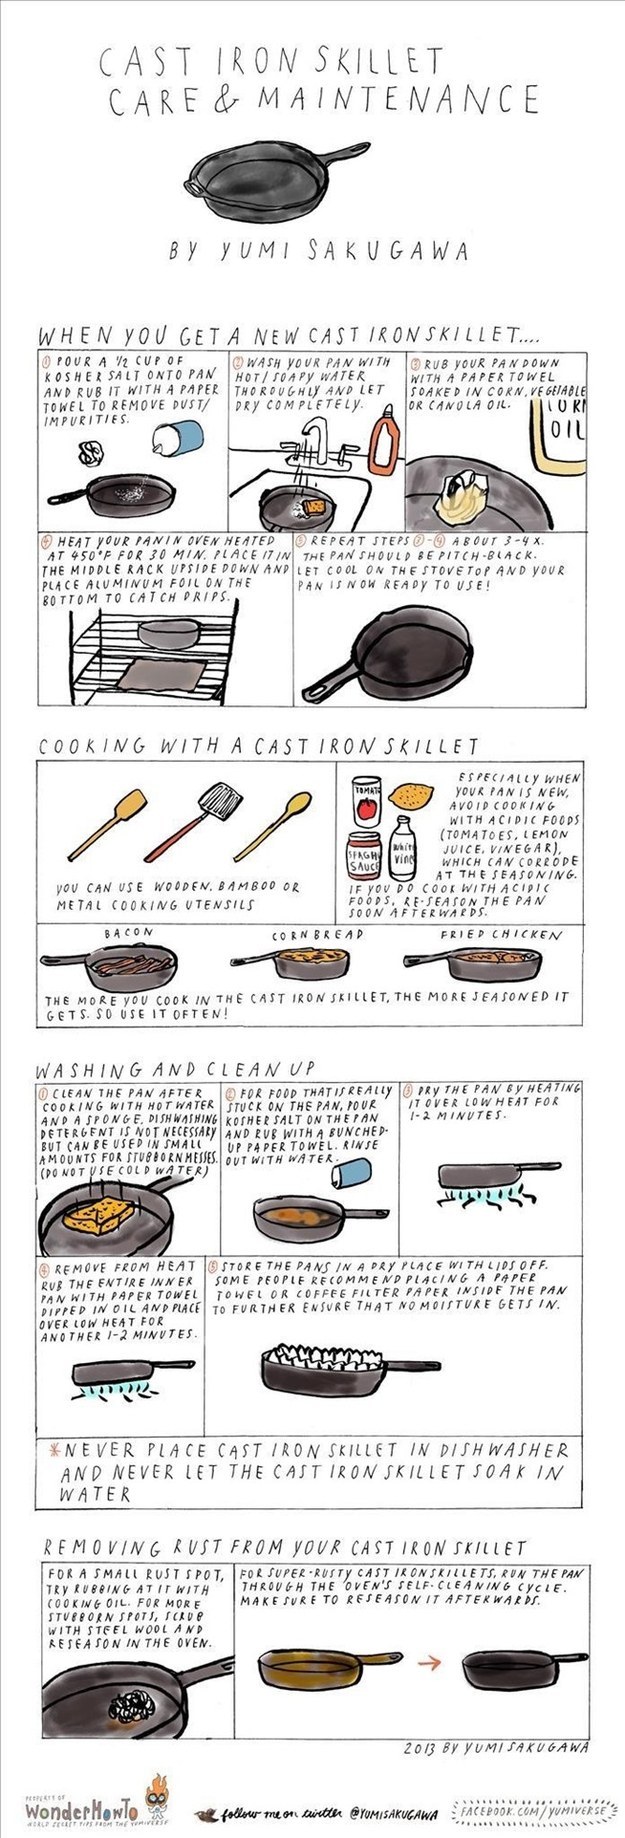 For cooking with and maintaining a cast iron skillet